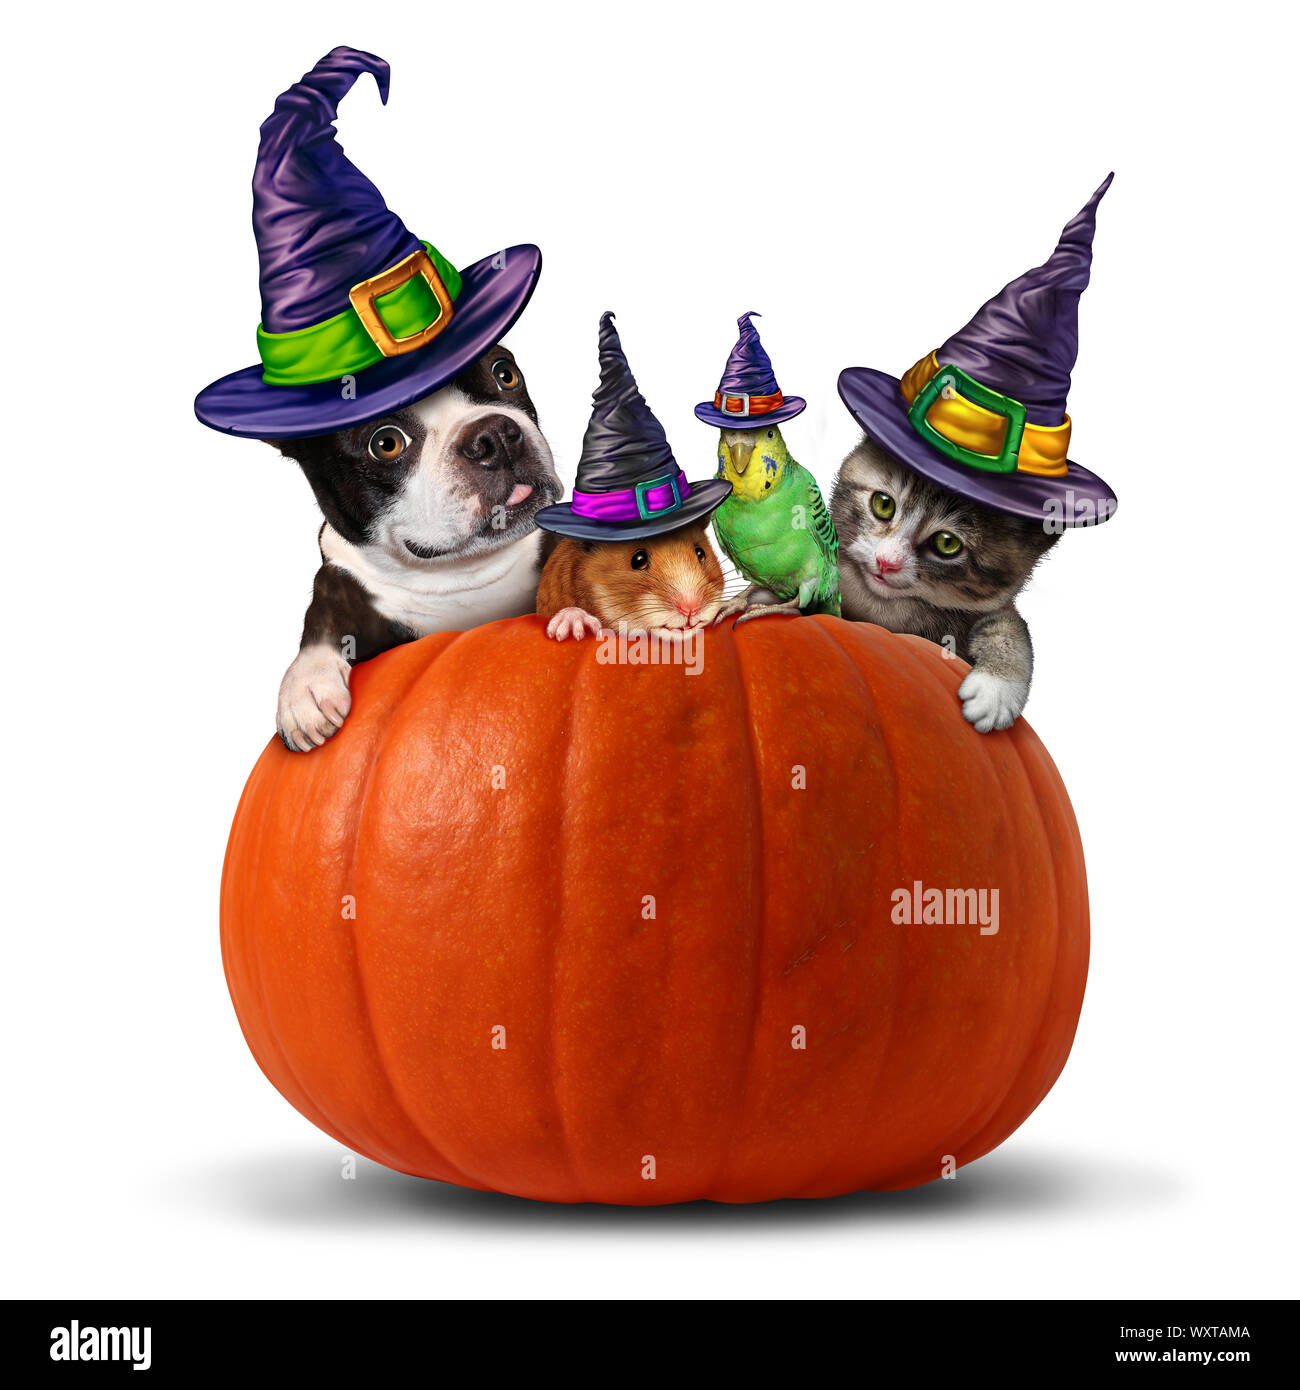 Pet halloween symbol as a group of pets as a dog cat bird and hamster dressed in holiday costumes sitting on a pumpkin with 3D illustration elements. Stock Photo